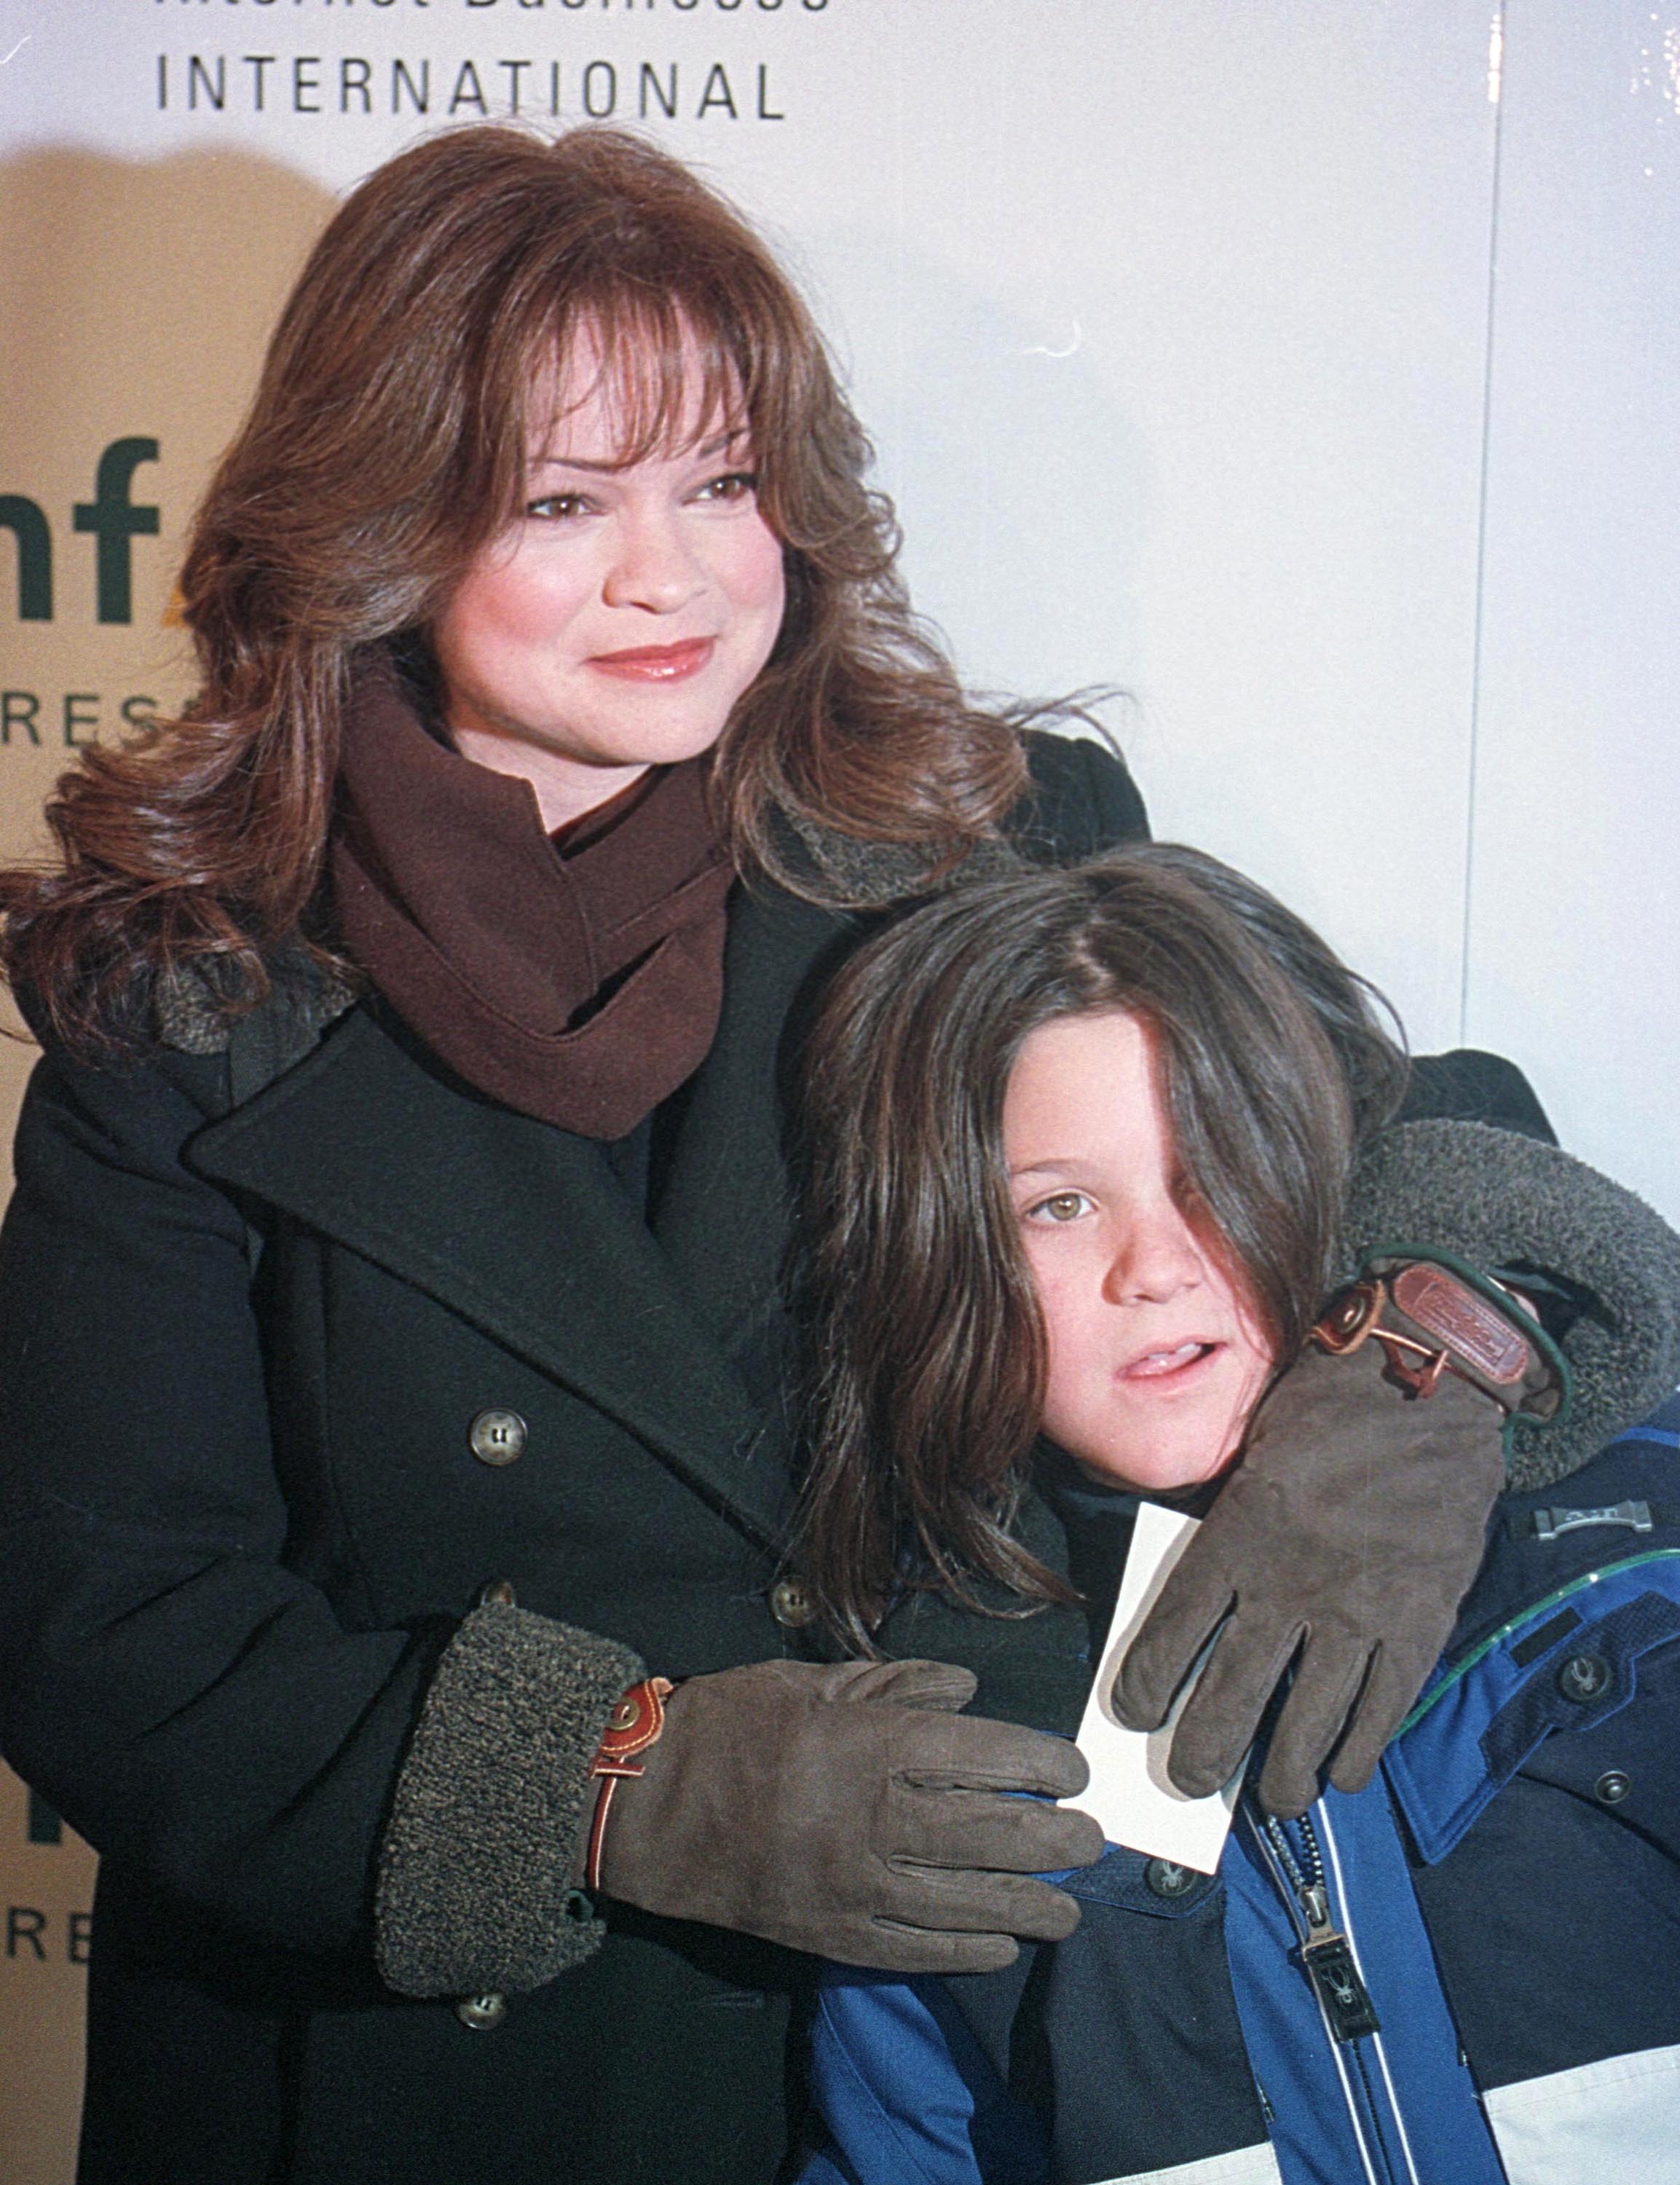 Valerie Bertinelli and Wolfgang arrive for the ''Cinema Against AIDS'' benefit at the Sundance Film Festival January 22, 2001 in Park City, UT. | Source: Getty Images